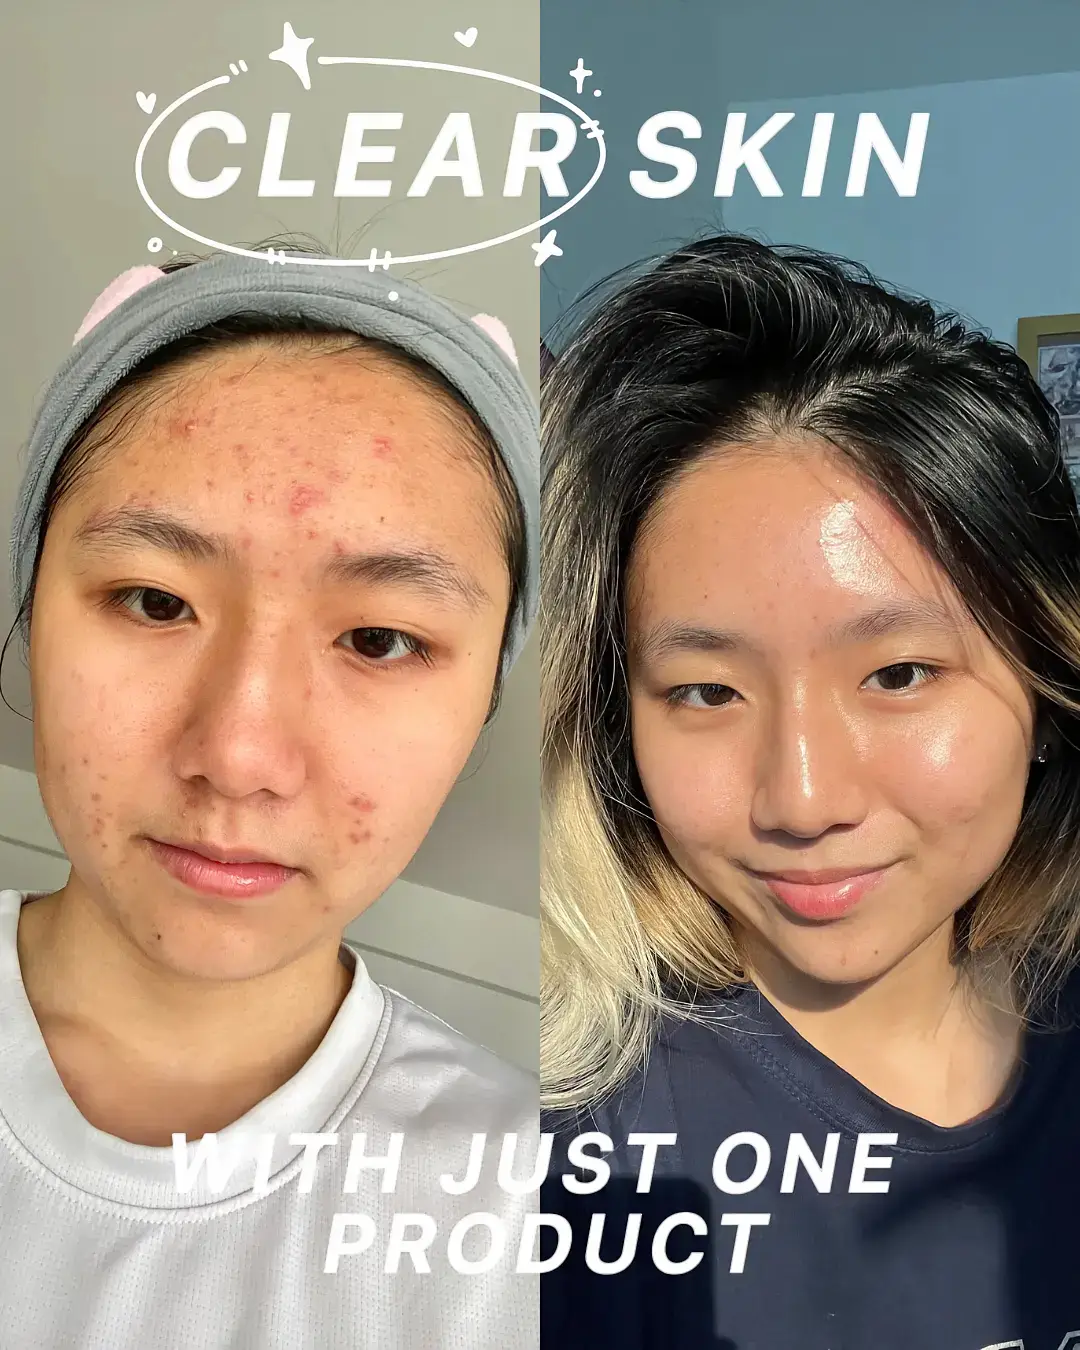 clear skin with just one product  🧖🏻‍♀️💗's images(0)